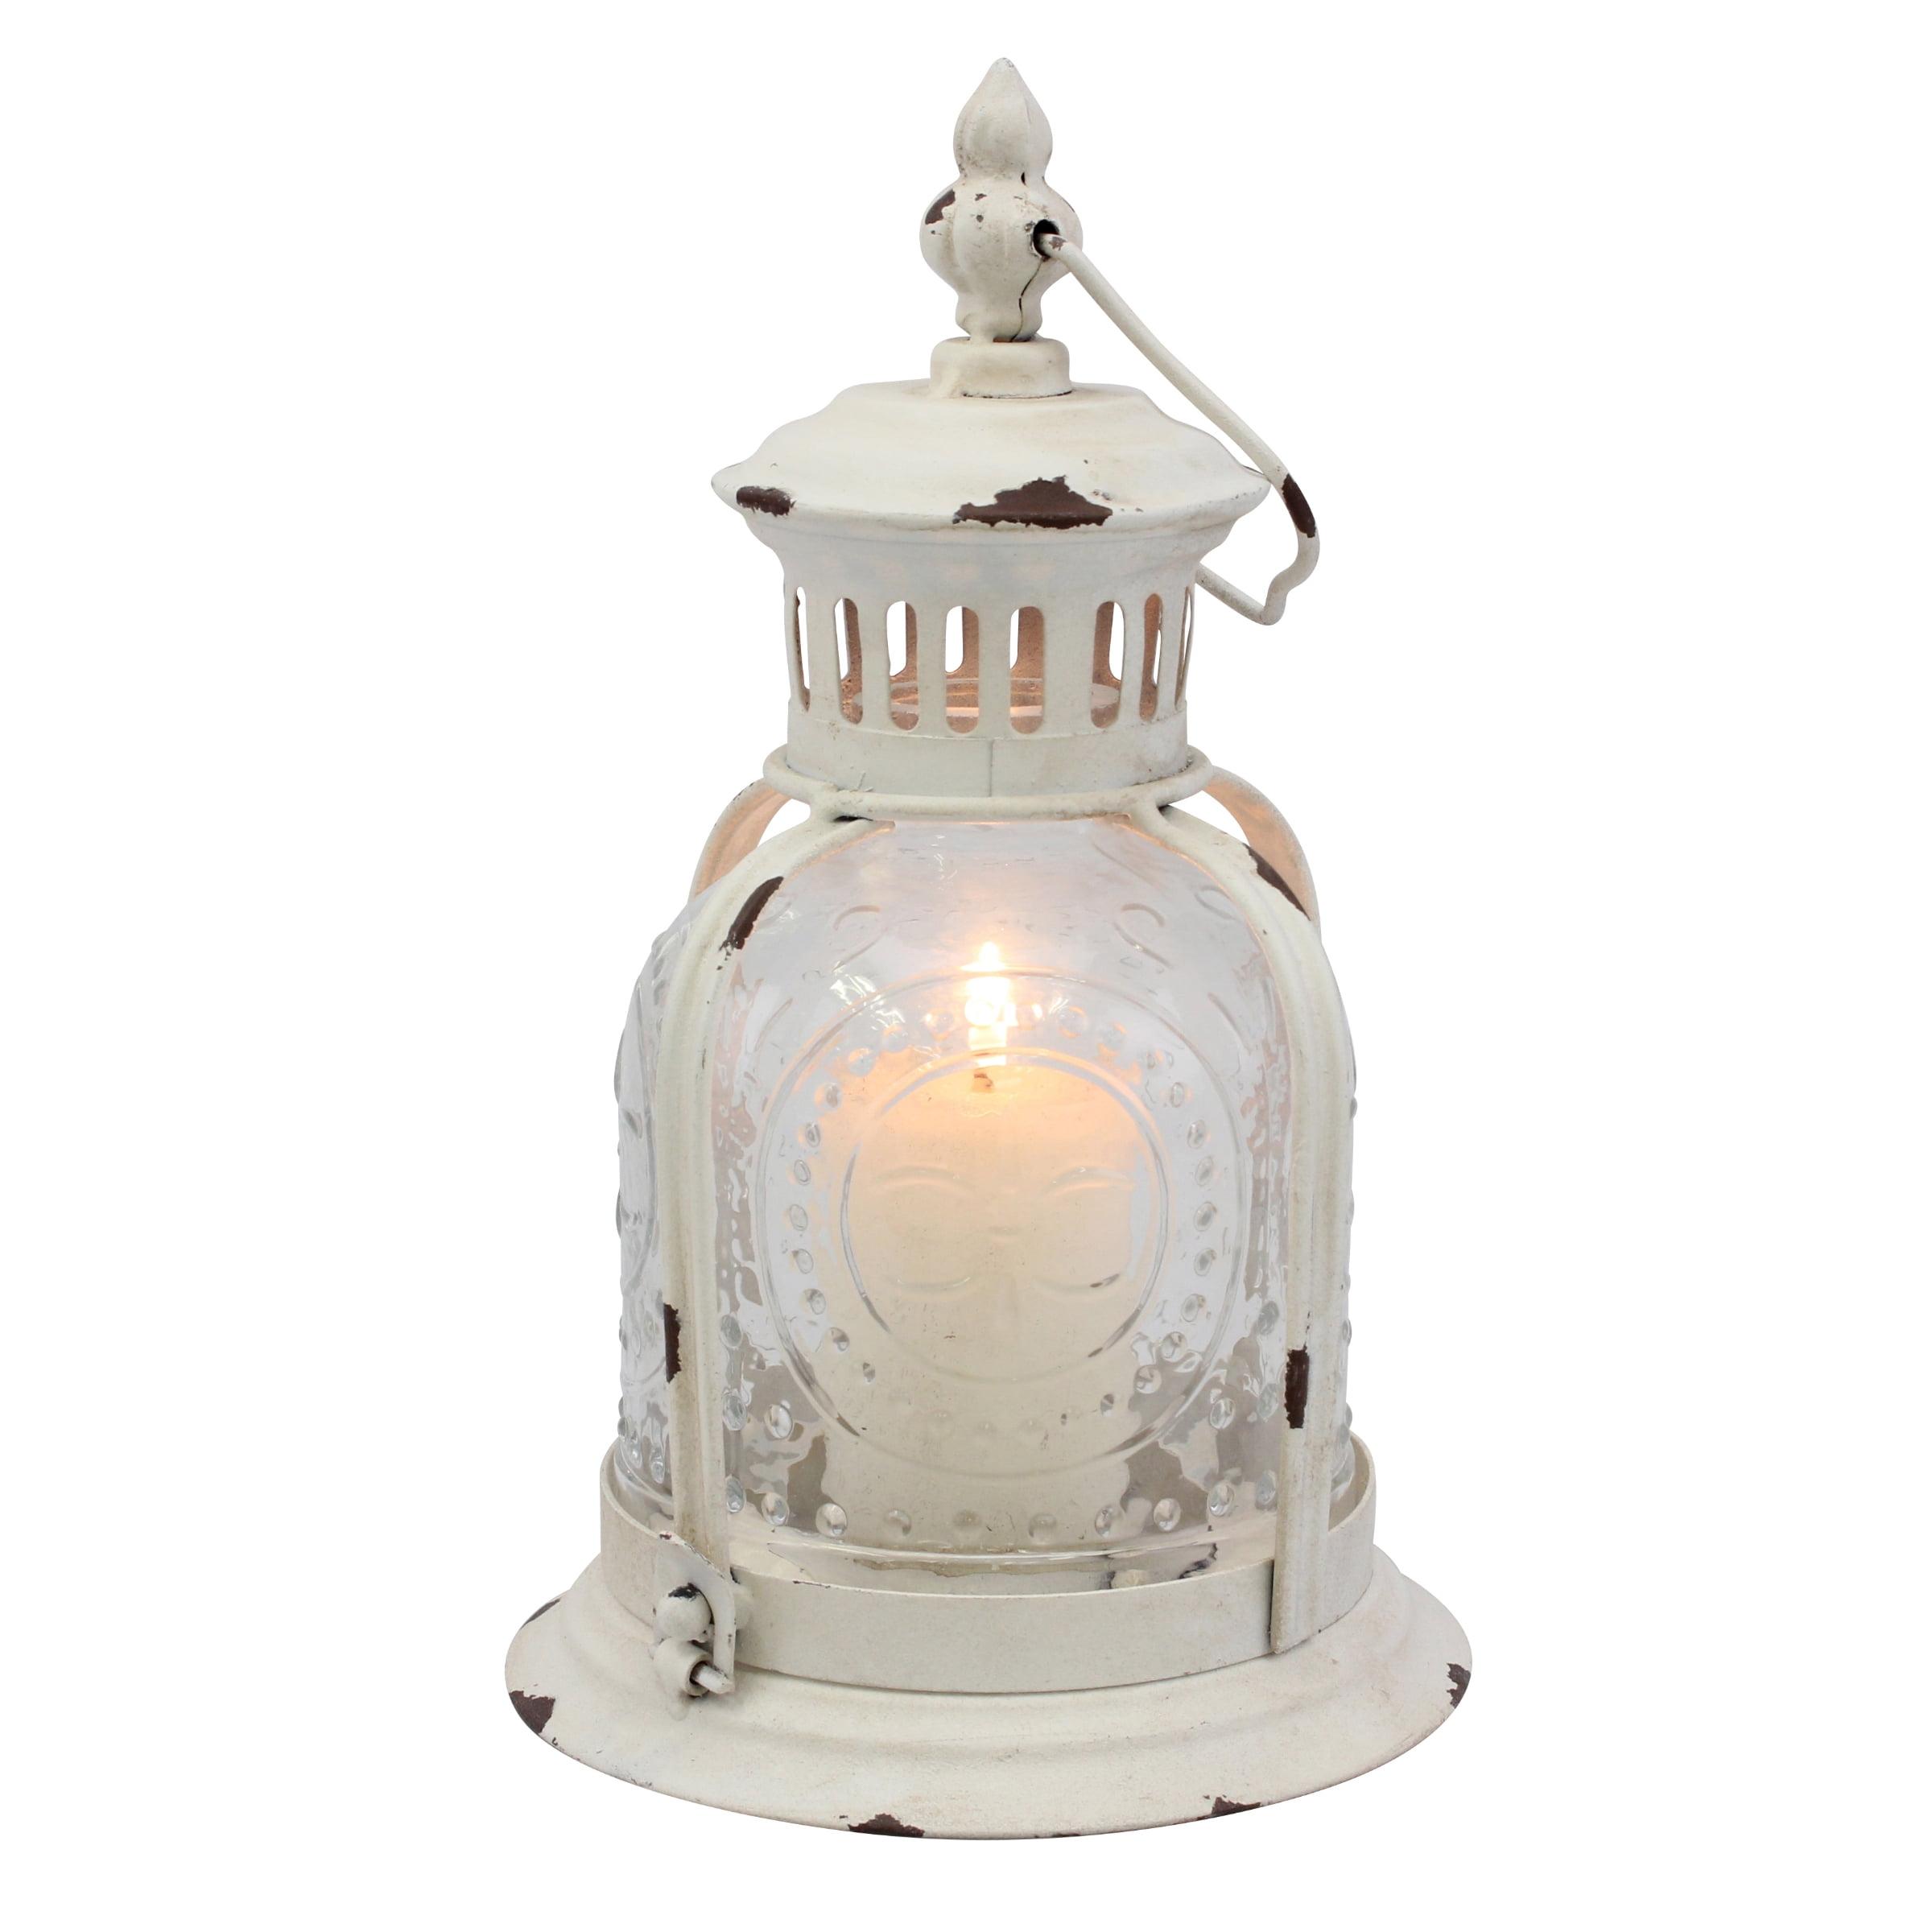 Distressed White Metal and Glass Tabletop Candle Lantern, 6.4" x 9.9"